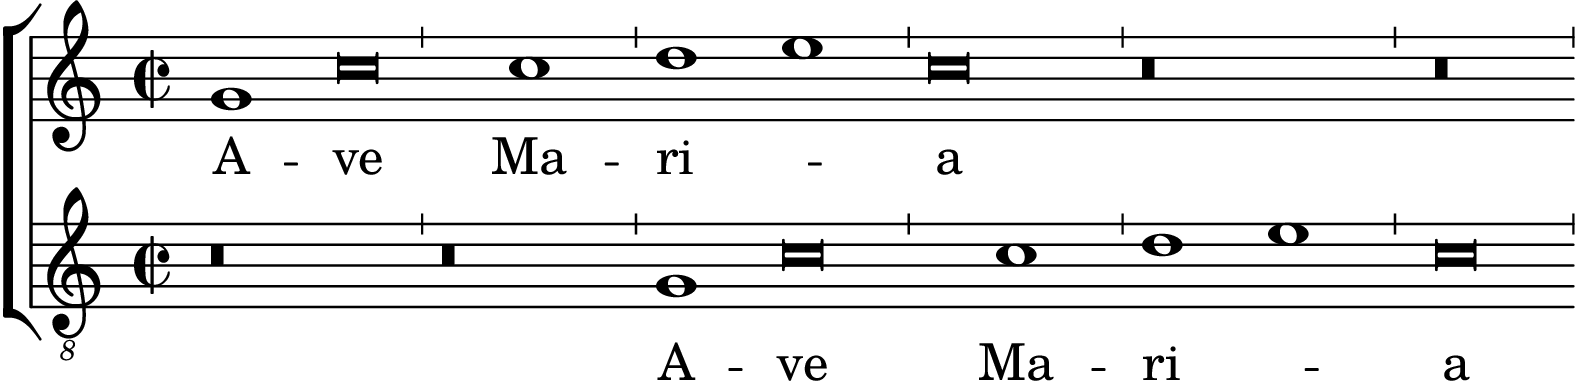 Figure 3: The opening of Ave Maria in modern score